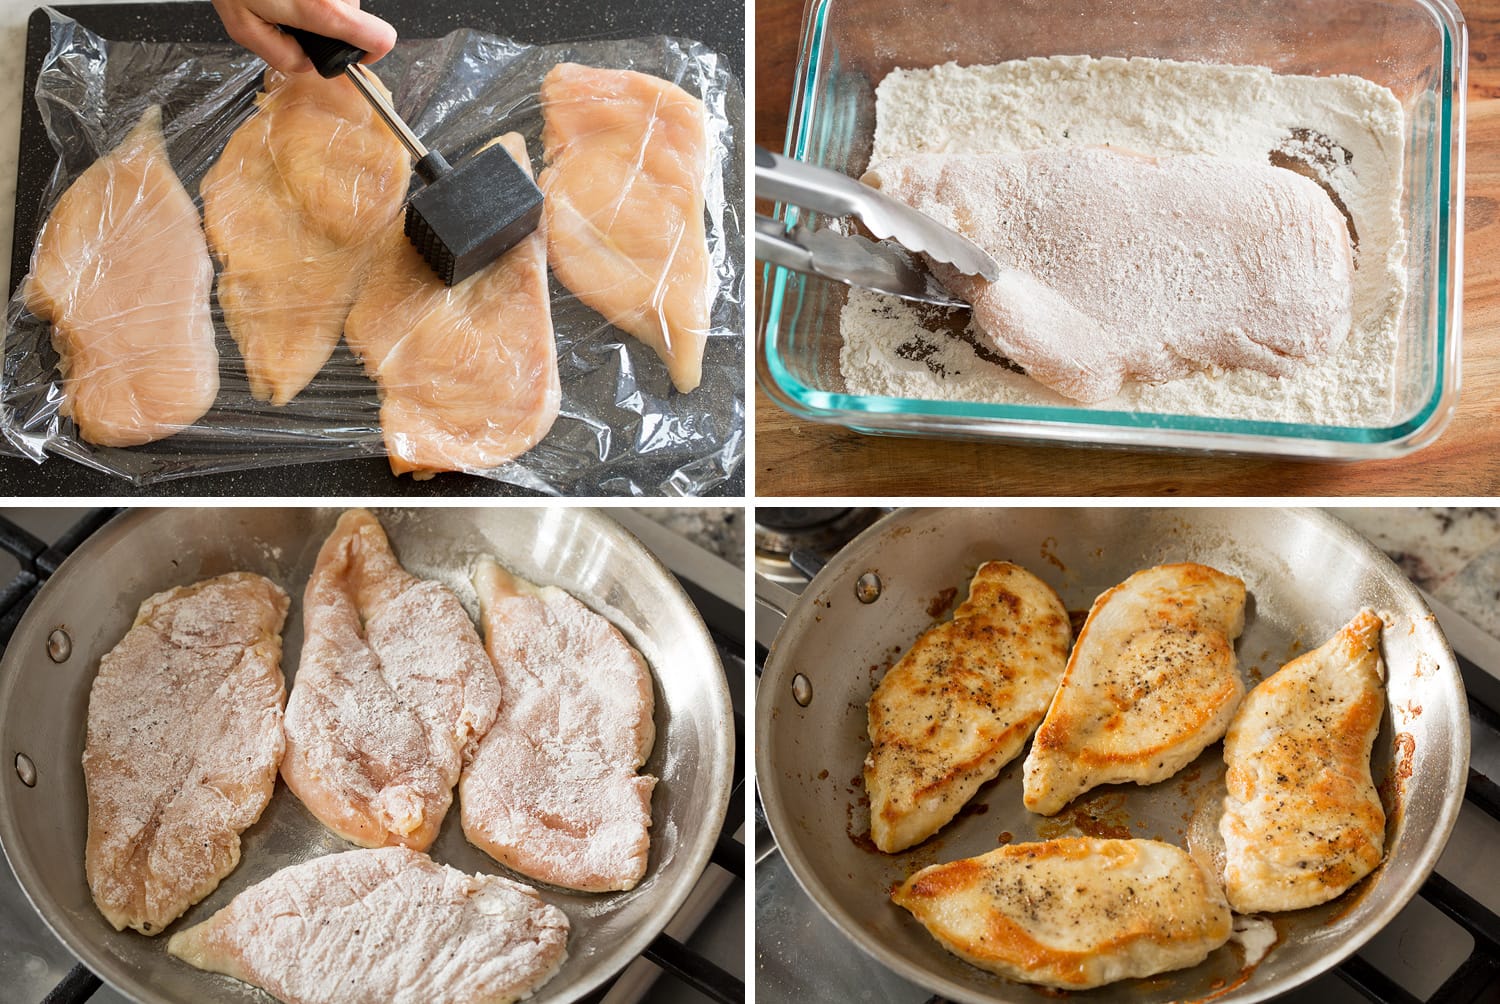 Four steps showing how to dredge chicken breasts in flour and pan fry.